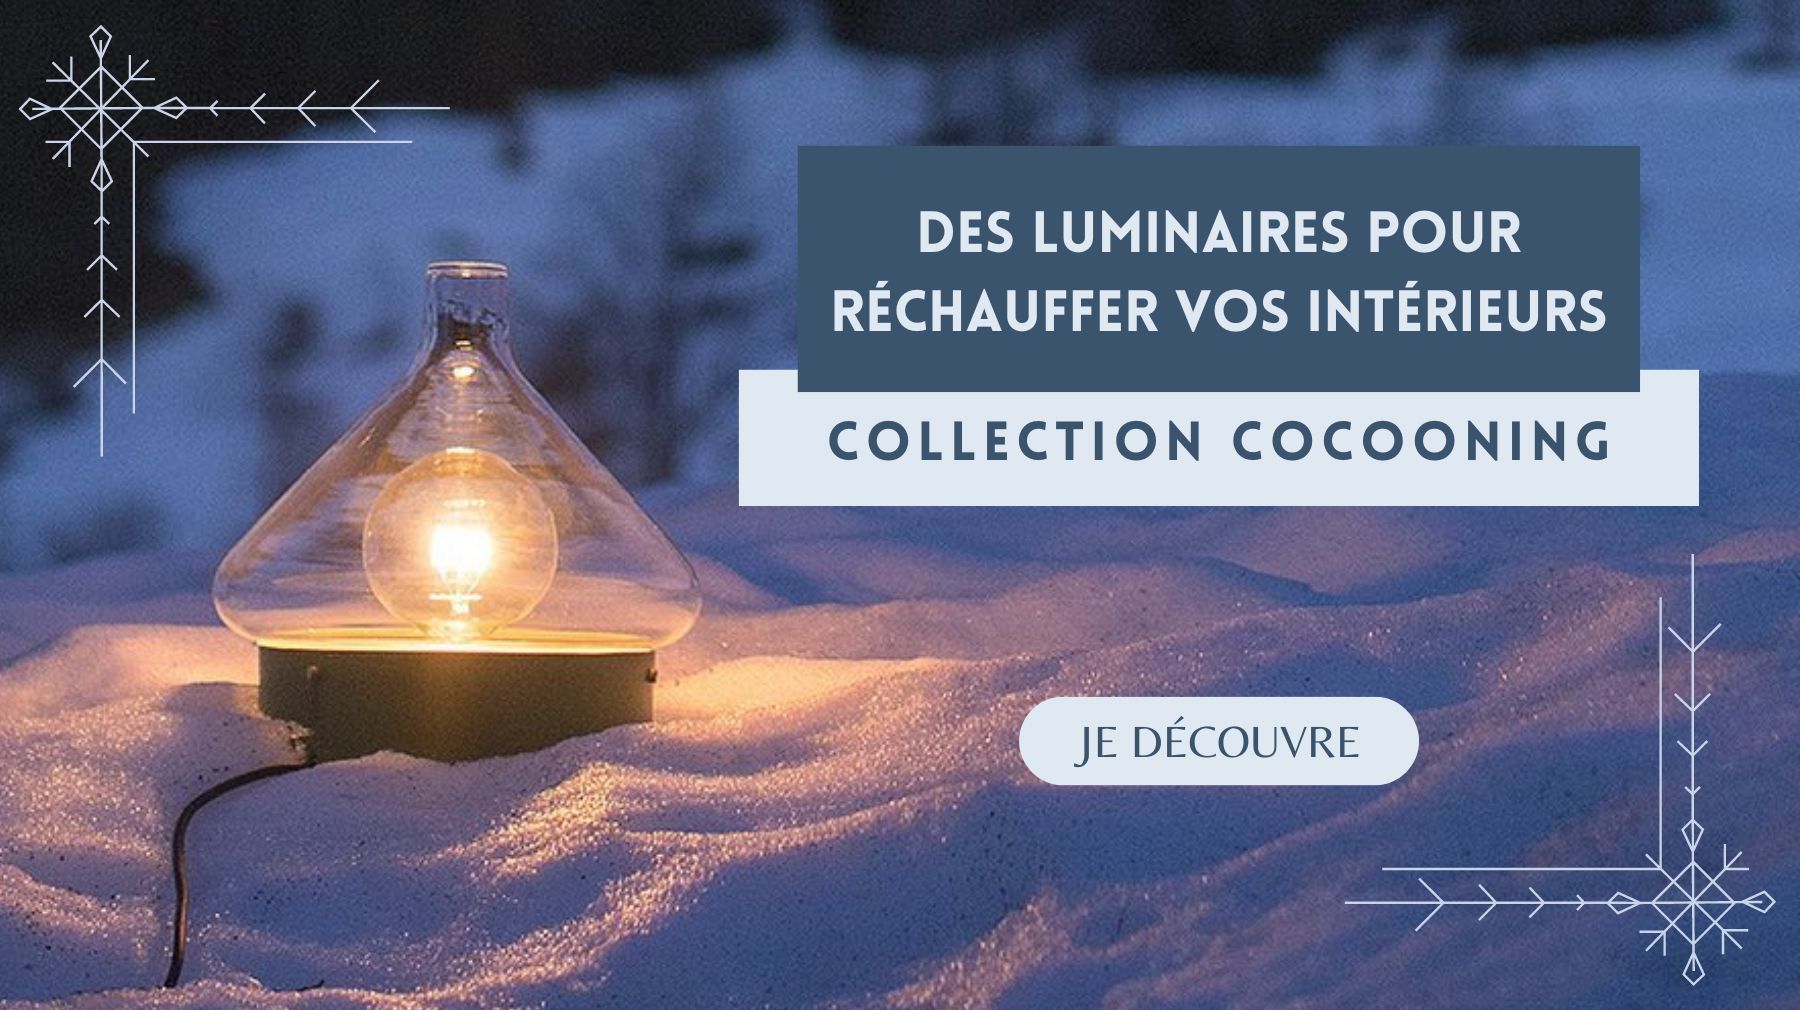 Collection Cocooning